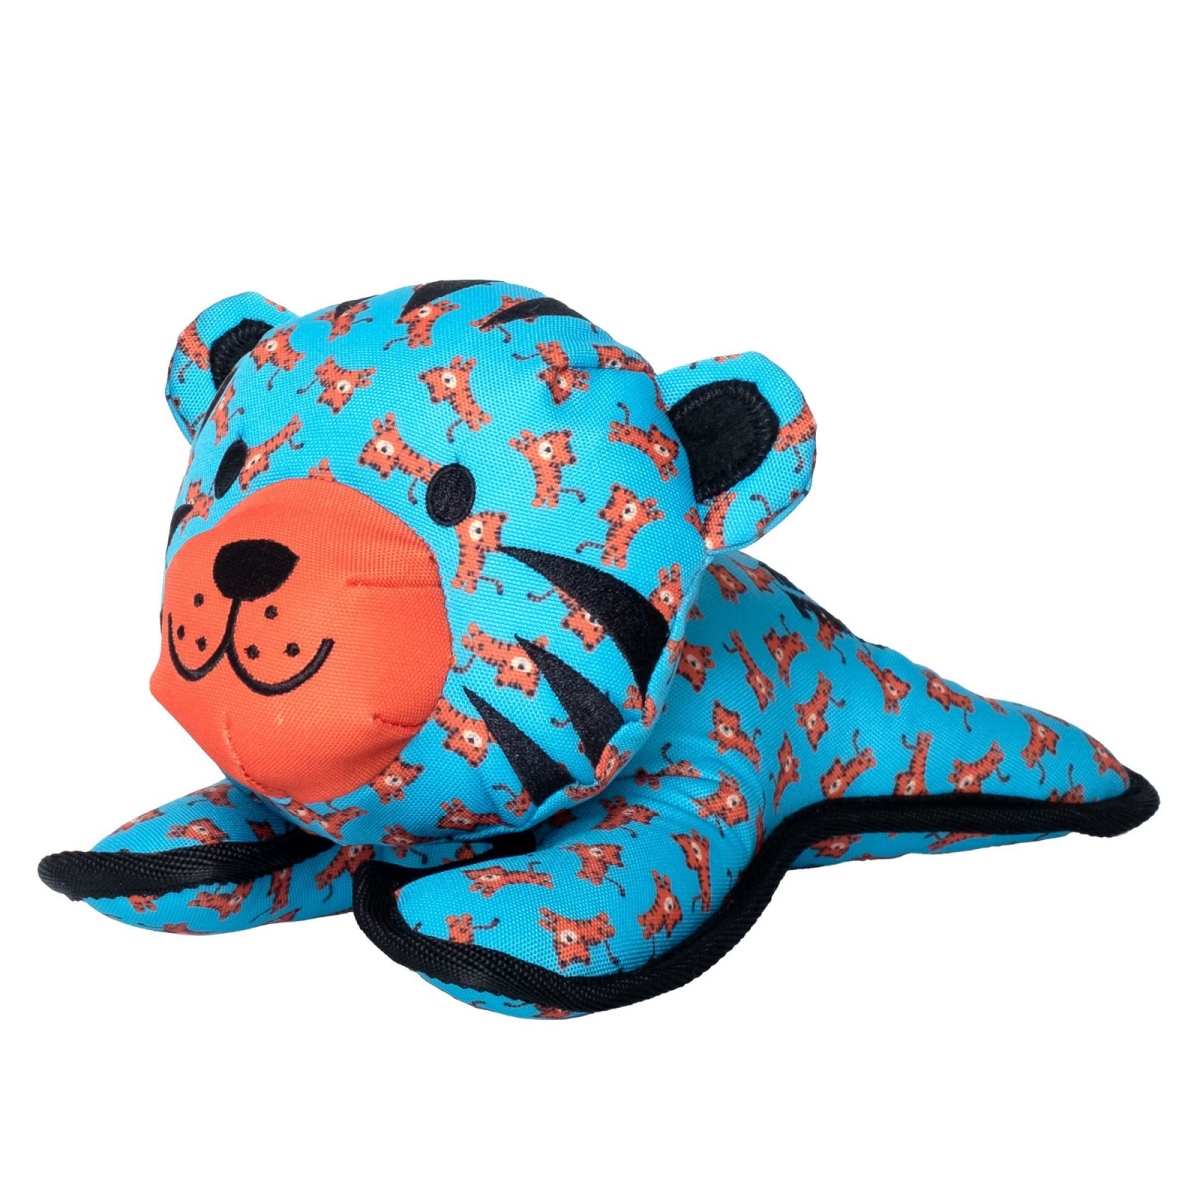 Picture of The Worthy Dog 845851099311 Tiger Plush Toy for Dog, Blue - Large